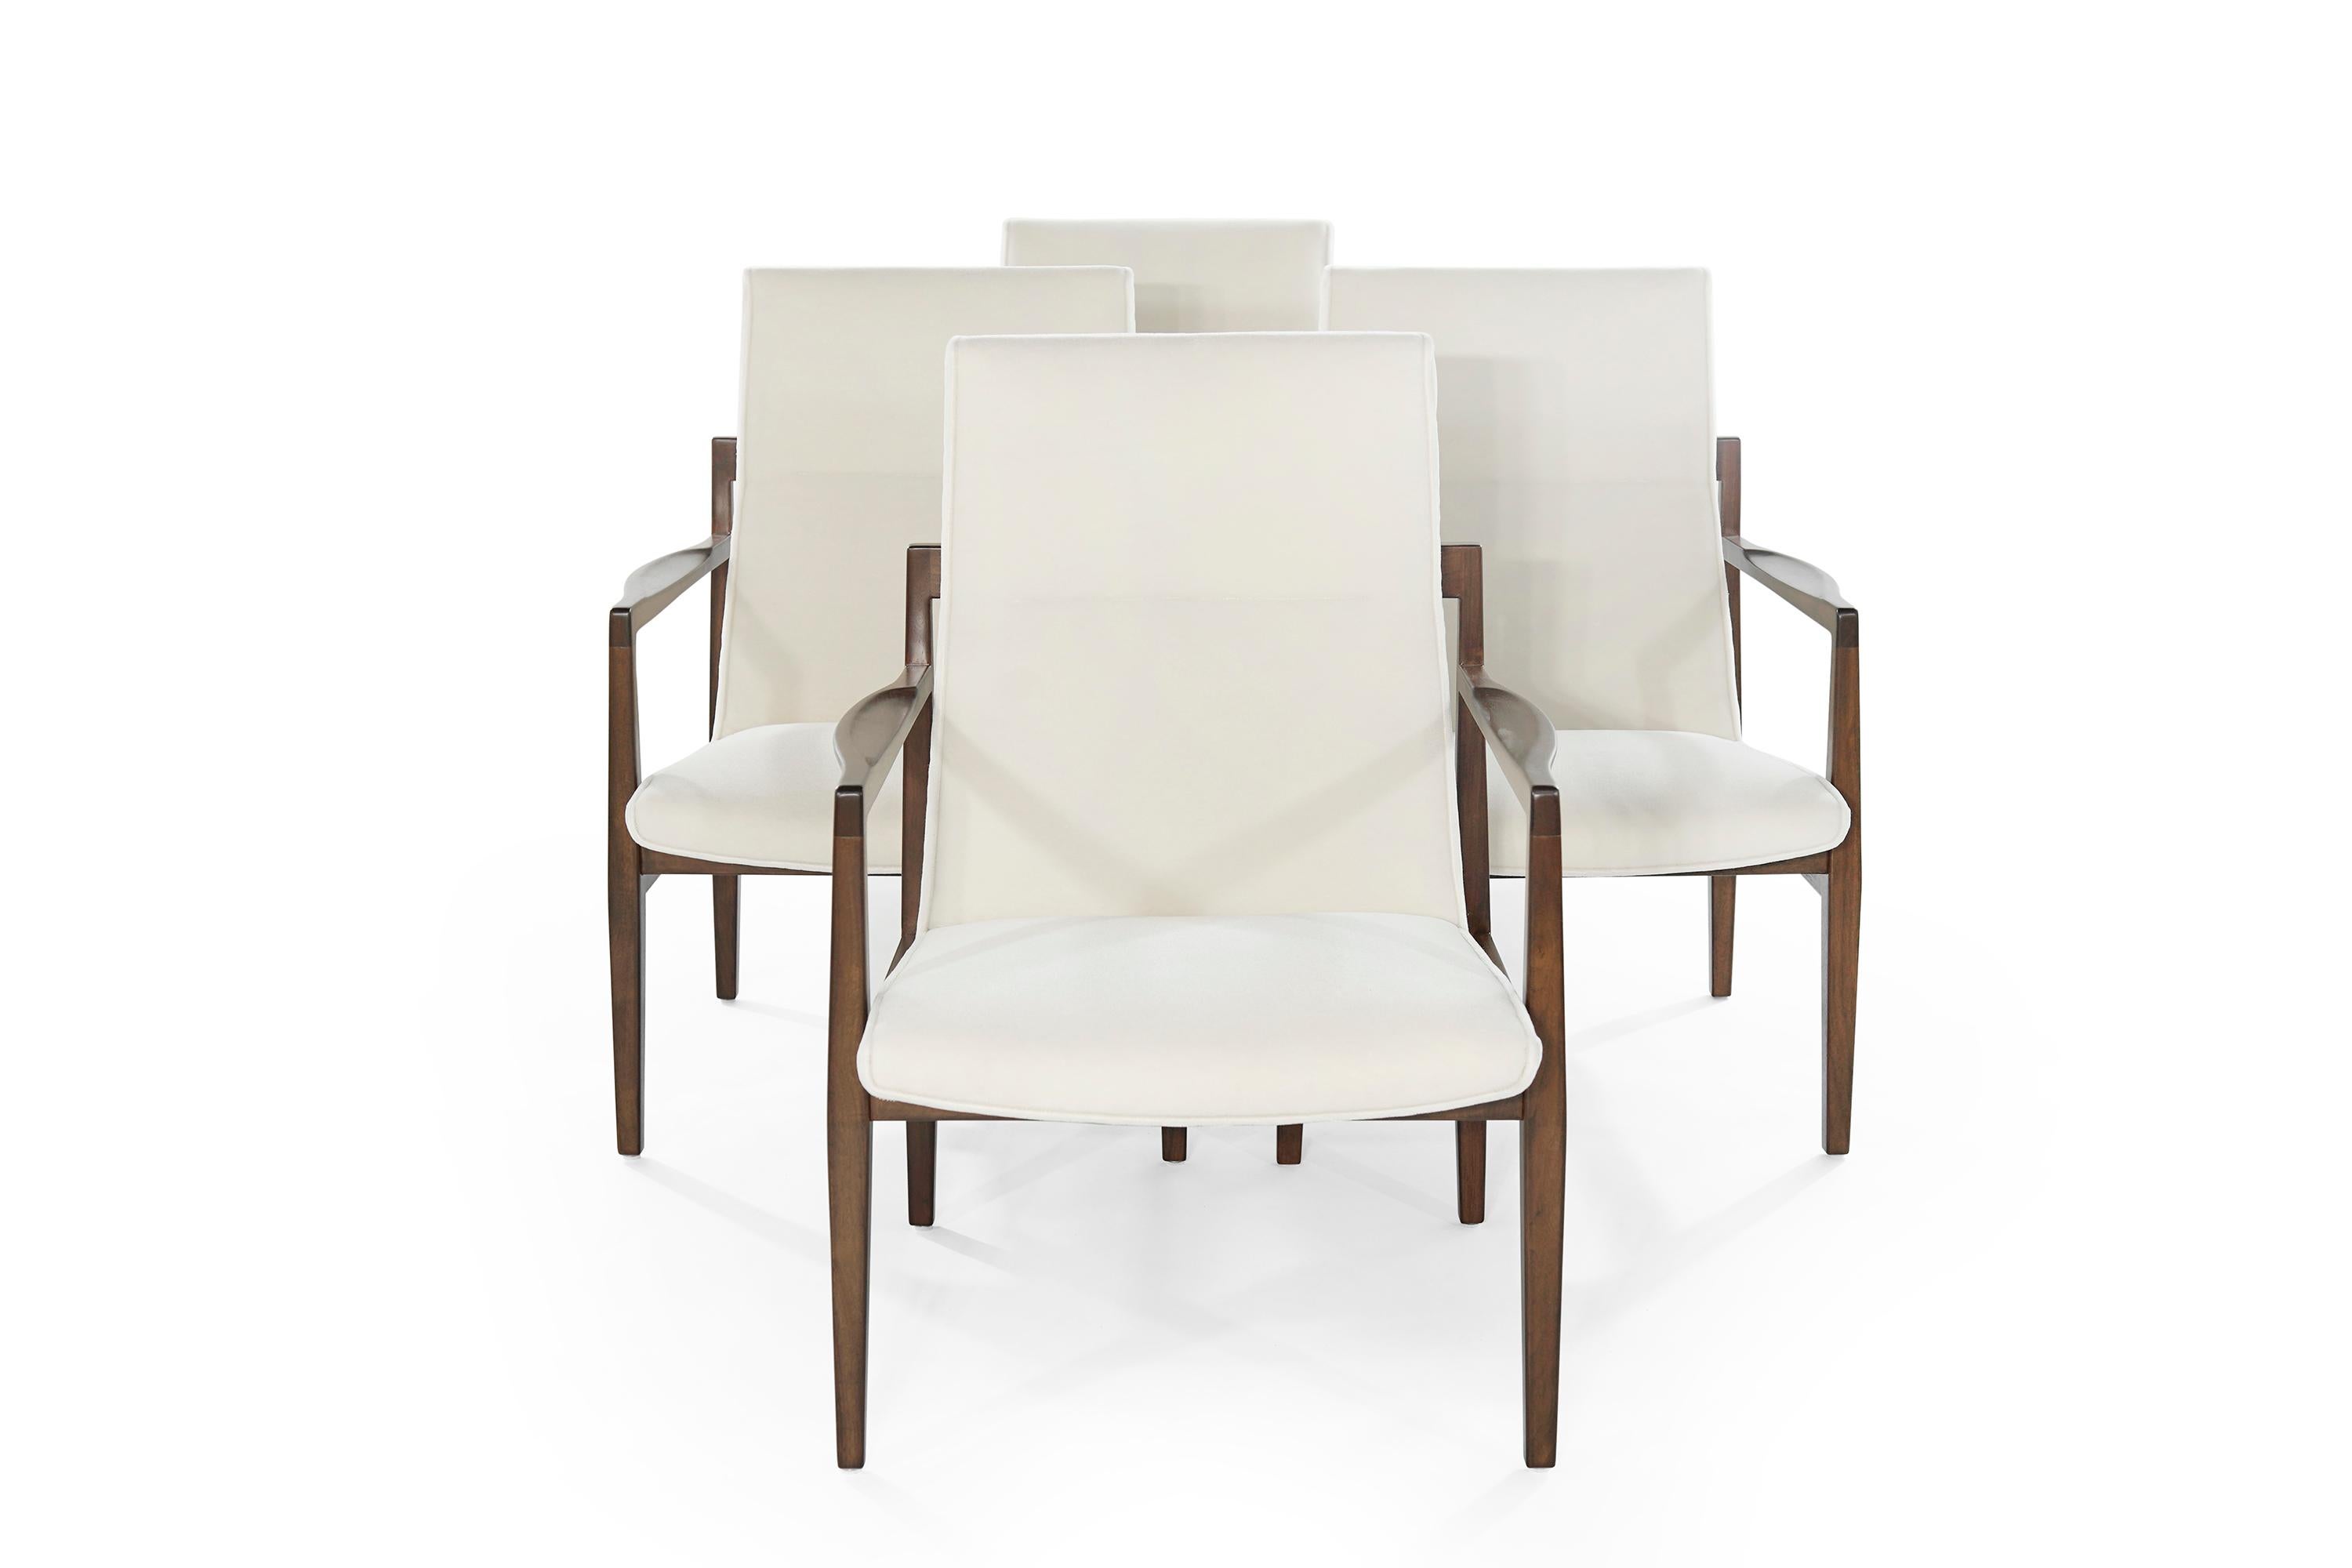 American Set of Four Lounge Chairs by Jens Risom, c. 1960s